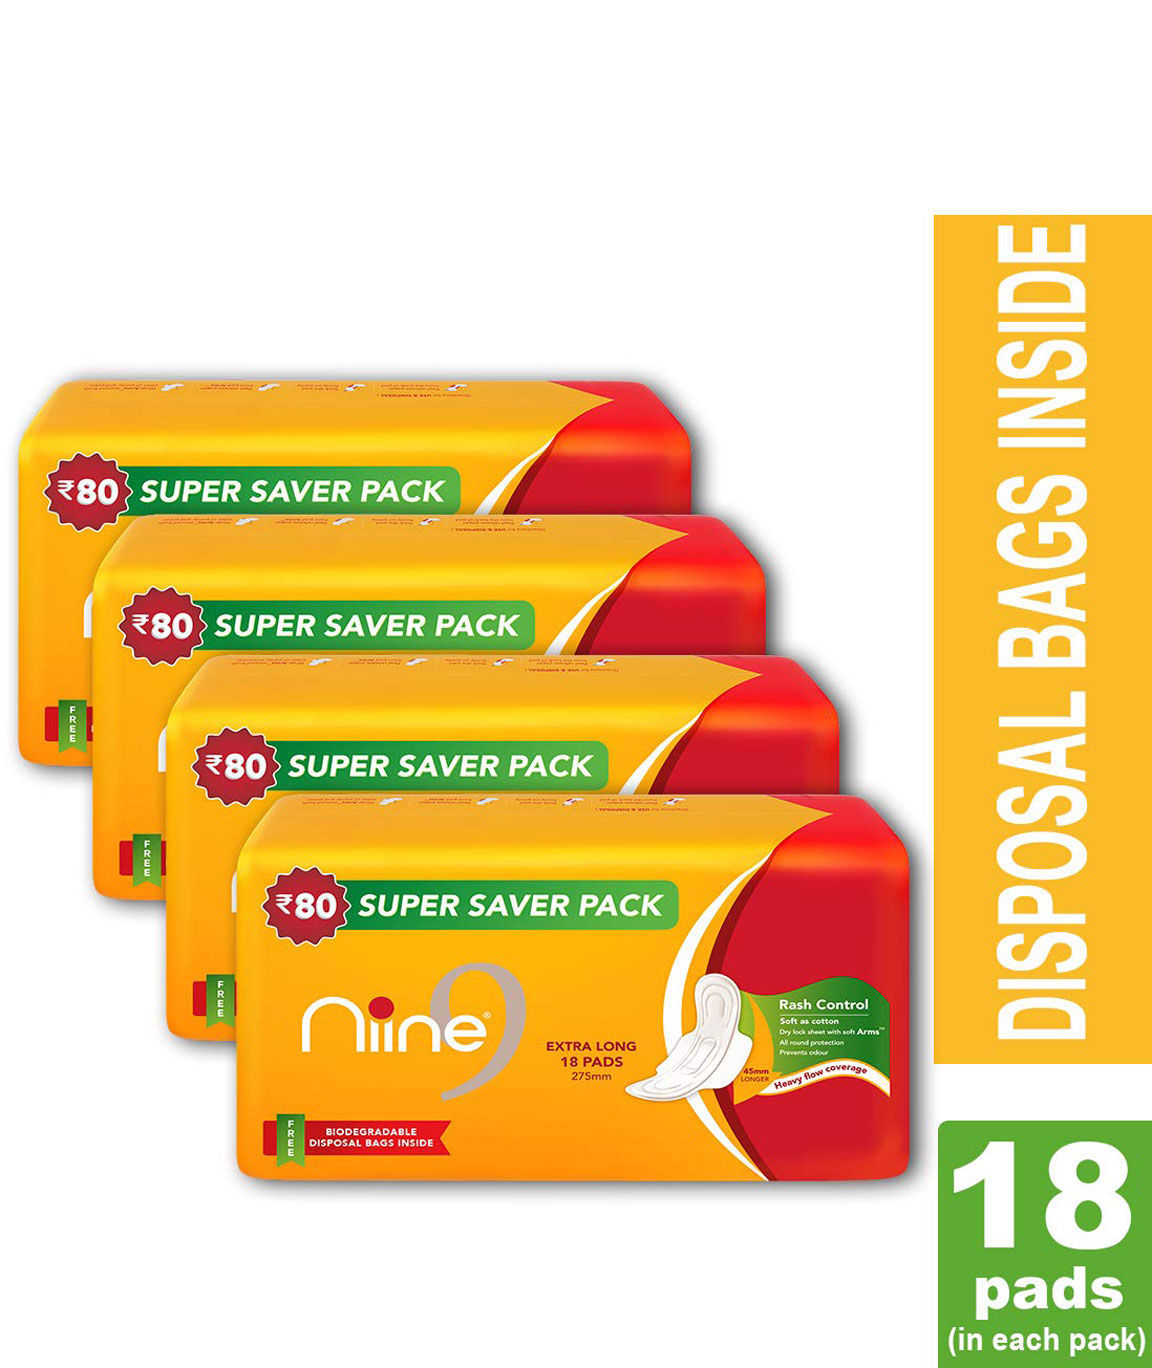 Nine Extra Long Sanitary Pads for women (Pack of 4), With disposable bags inside, 72 Pads Count (Super Saver Pack)